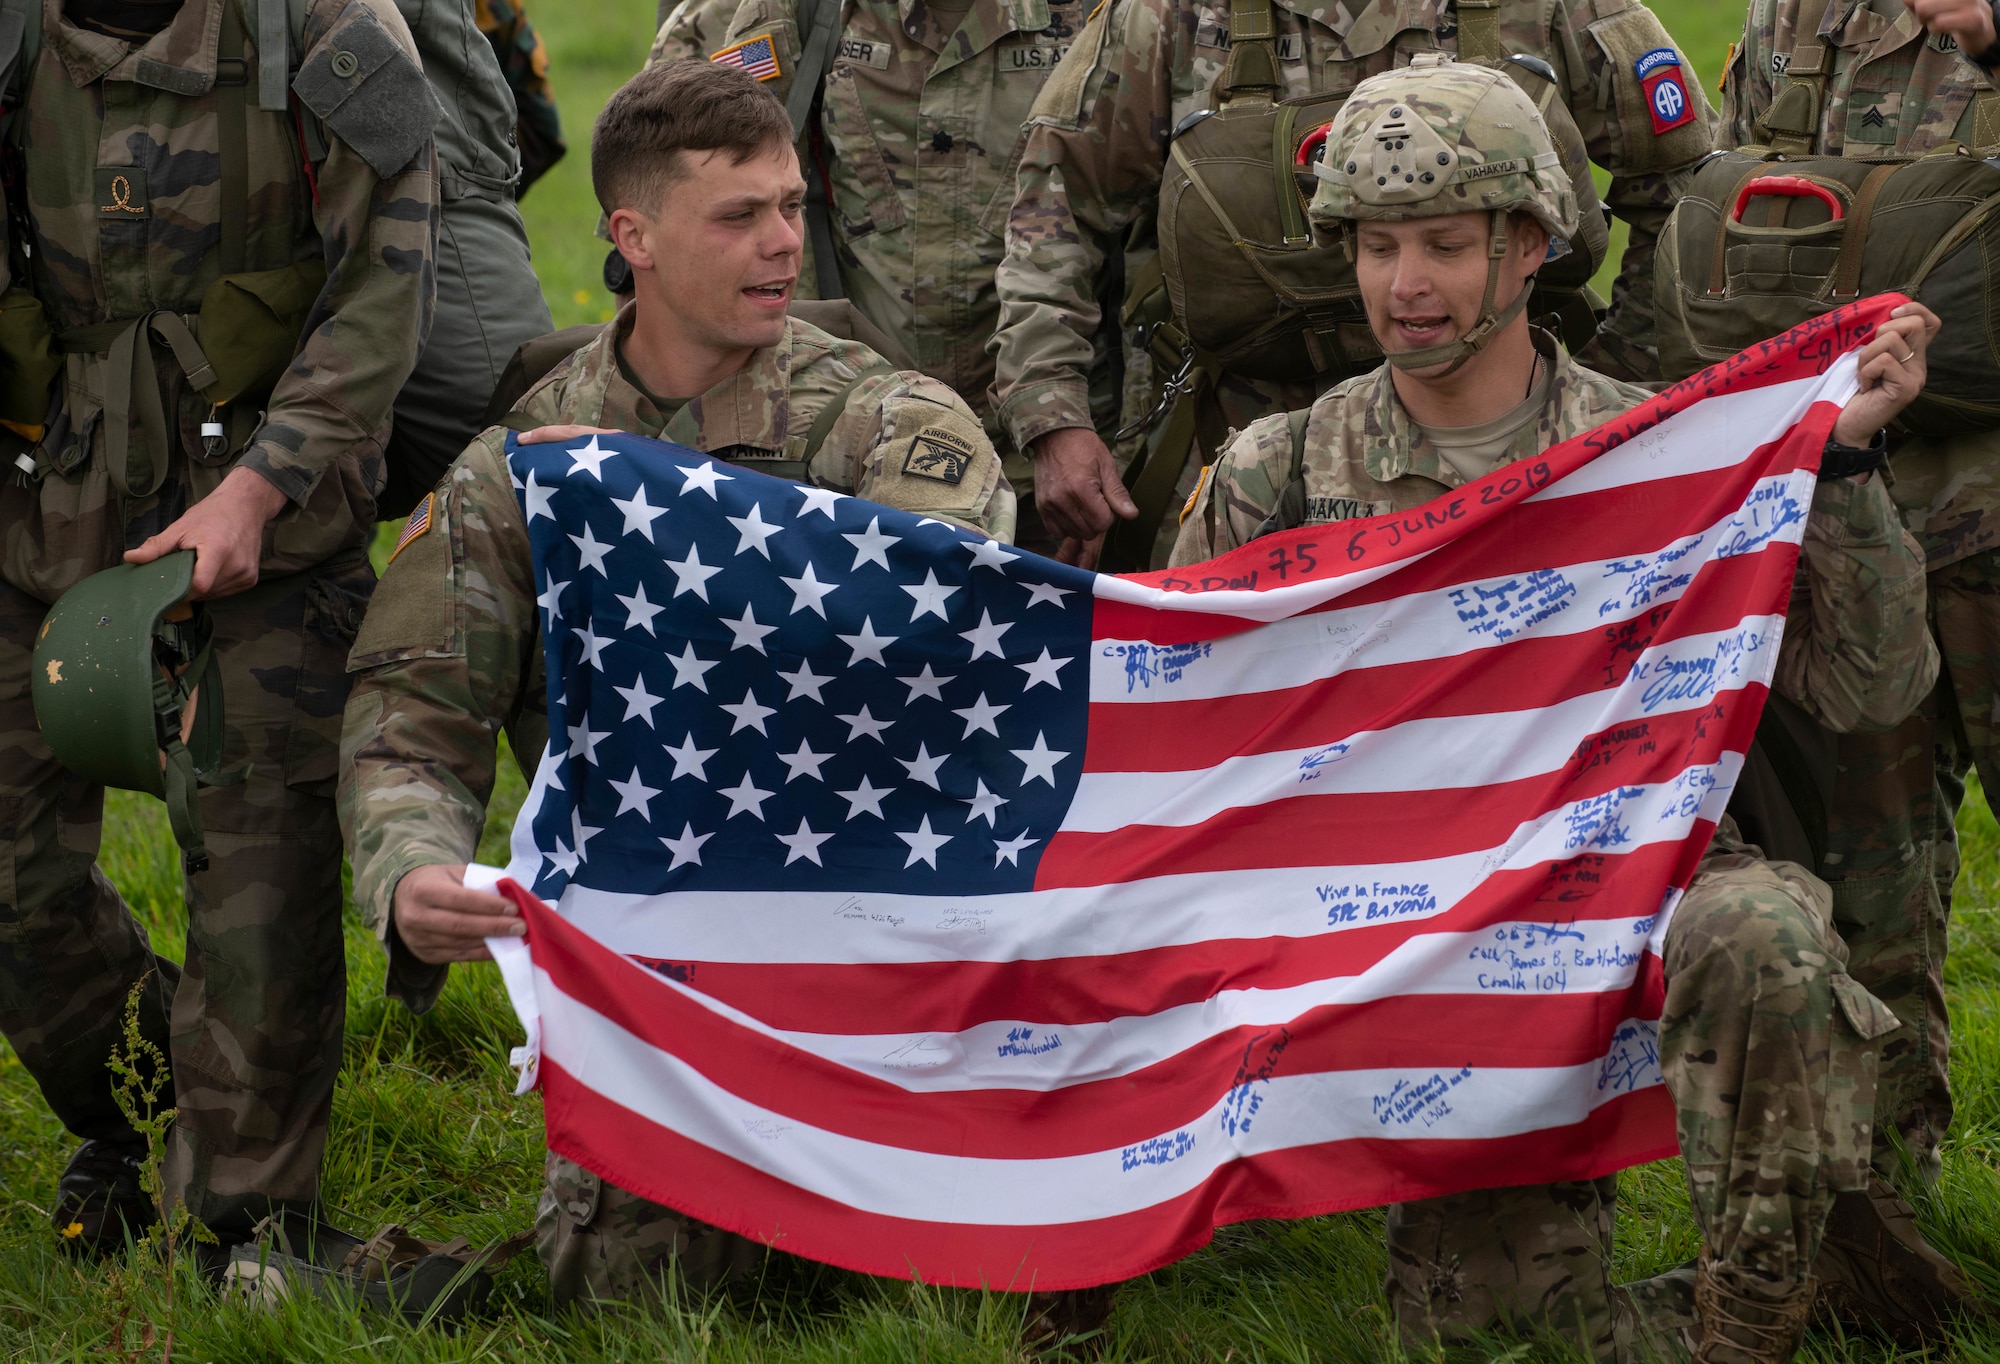 Service members hold the U.S flag after conducting a parachute jump during the D-Day 75 Commemorative Airborne Operation in Sainte-Mere-Eglise, France, June 9, 2019, which honors the epic airborne operation conducted by Allied forces on June 6, 1944. Seventy-five years later, the bravery and heroism by all allies during World War II continues to resonate with U.S. forces in Europe - who remain steadfast in their commitment to European allies and partners. (U.S. Air Force photo by Airman 1st Class Jennifer Zima)